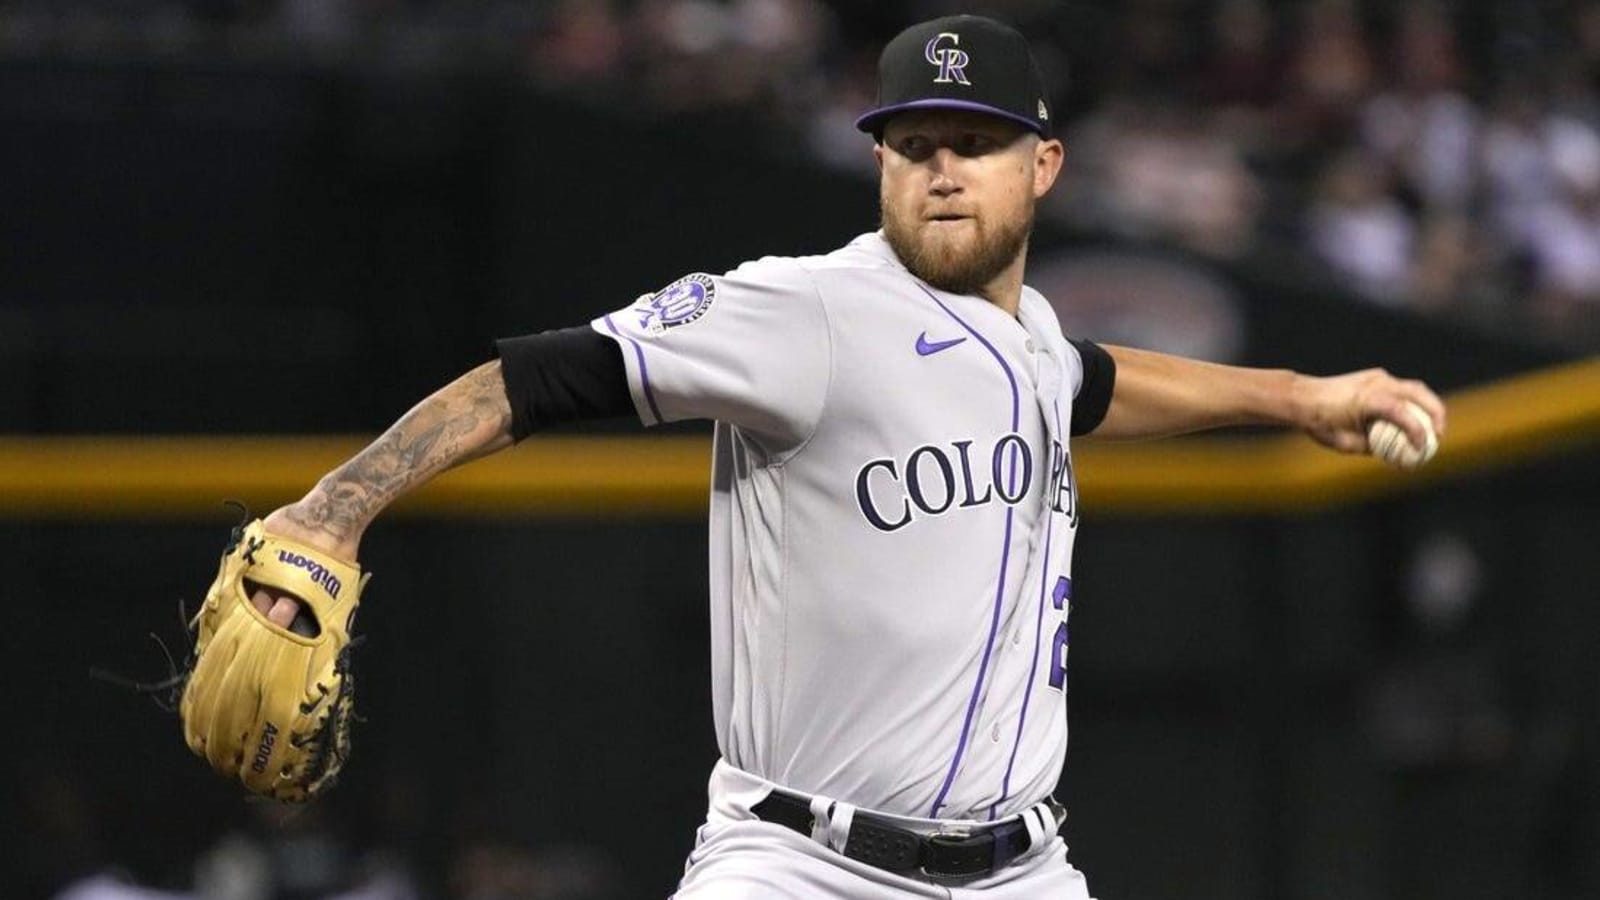 Kyle Freeland figures out D-backs; Rockies get rare win